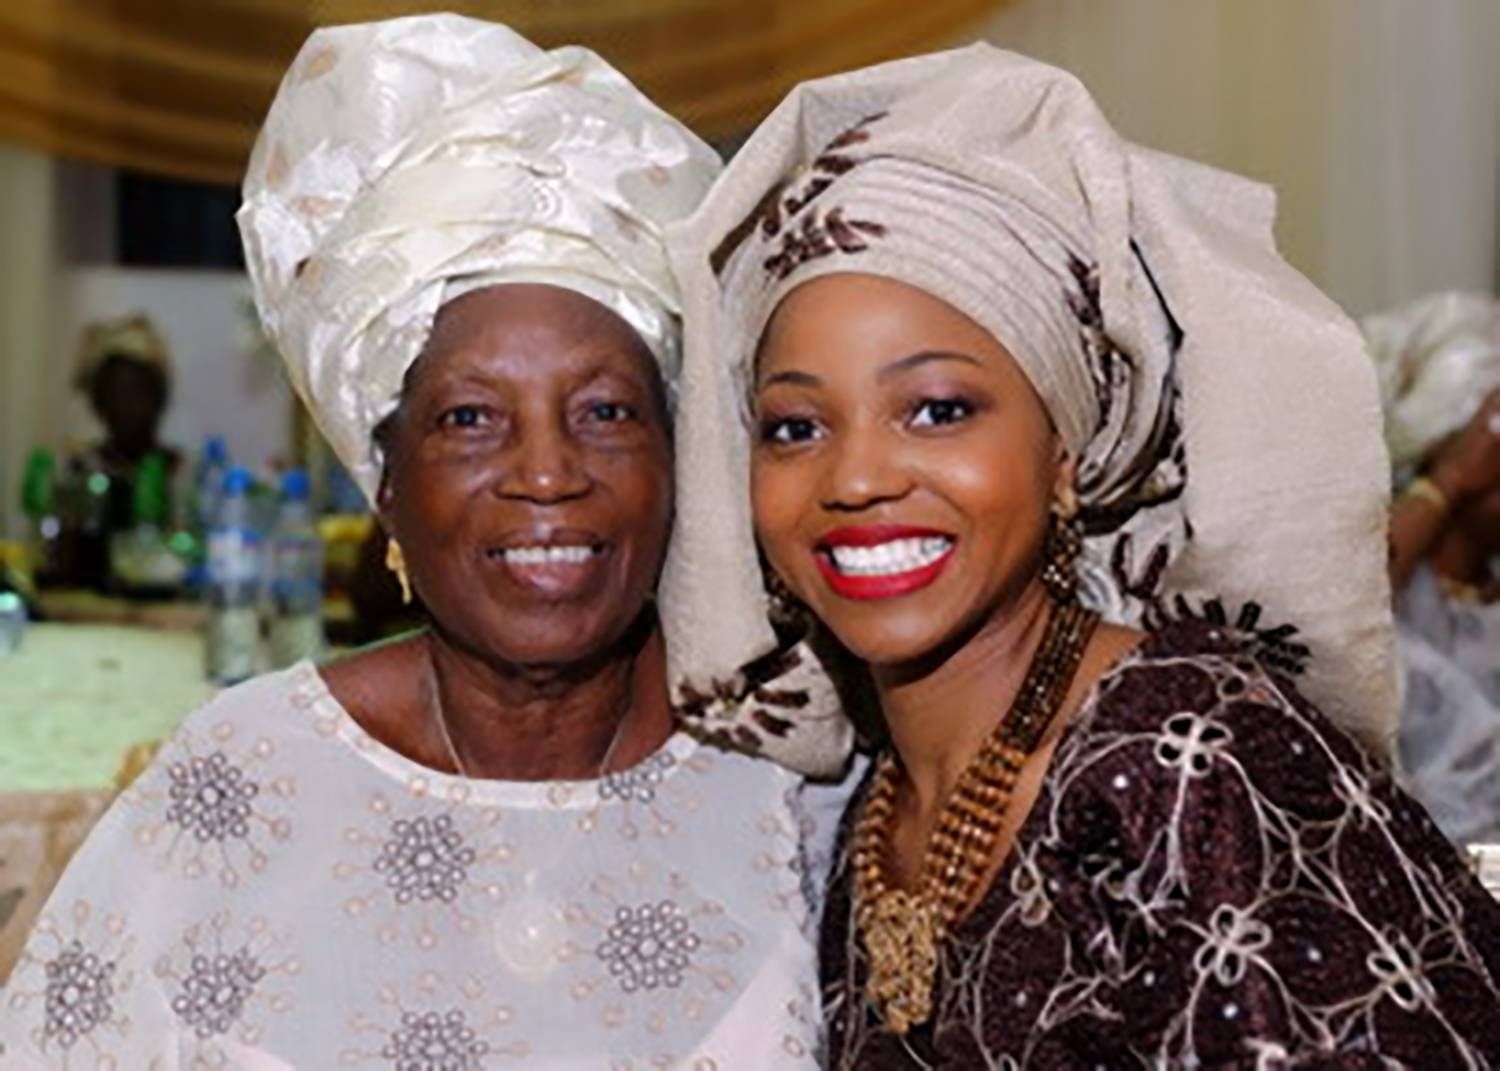 Gladys and her grandma wearing one of their traditional fabrics - aso oke - during Glady's wedding. Traditionally, the wedding party and family members will wear aso oke while guests wear Ankara prints. Note: The type of traditional fabric worn is also often based on preference.